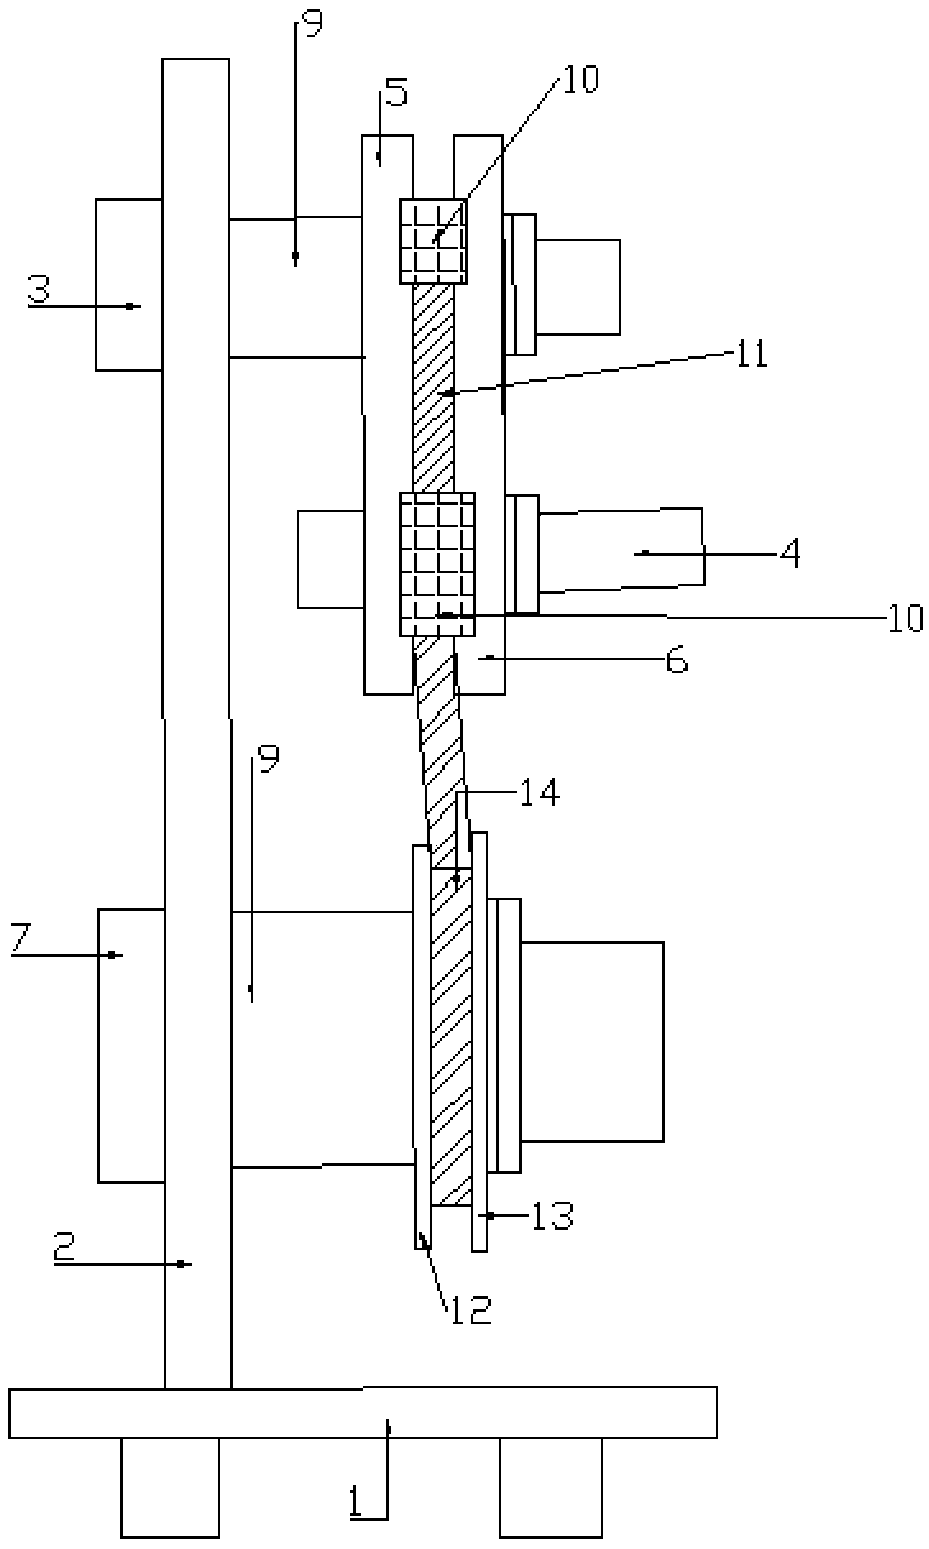 Winding locating tooling of preimpregnated glass rove tape